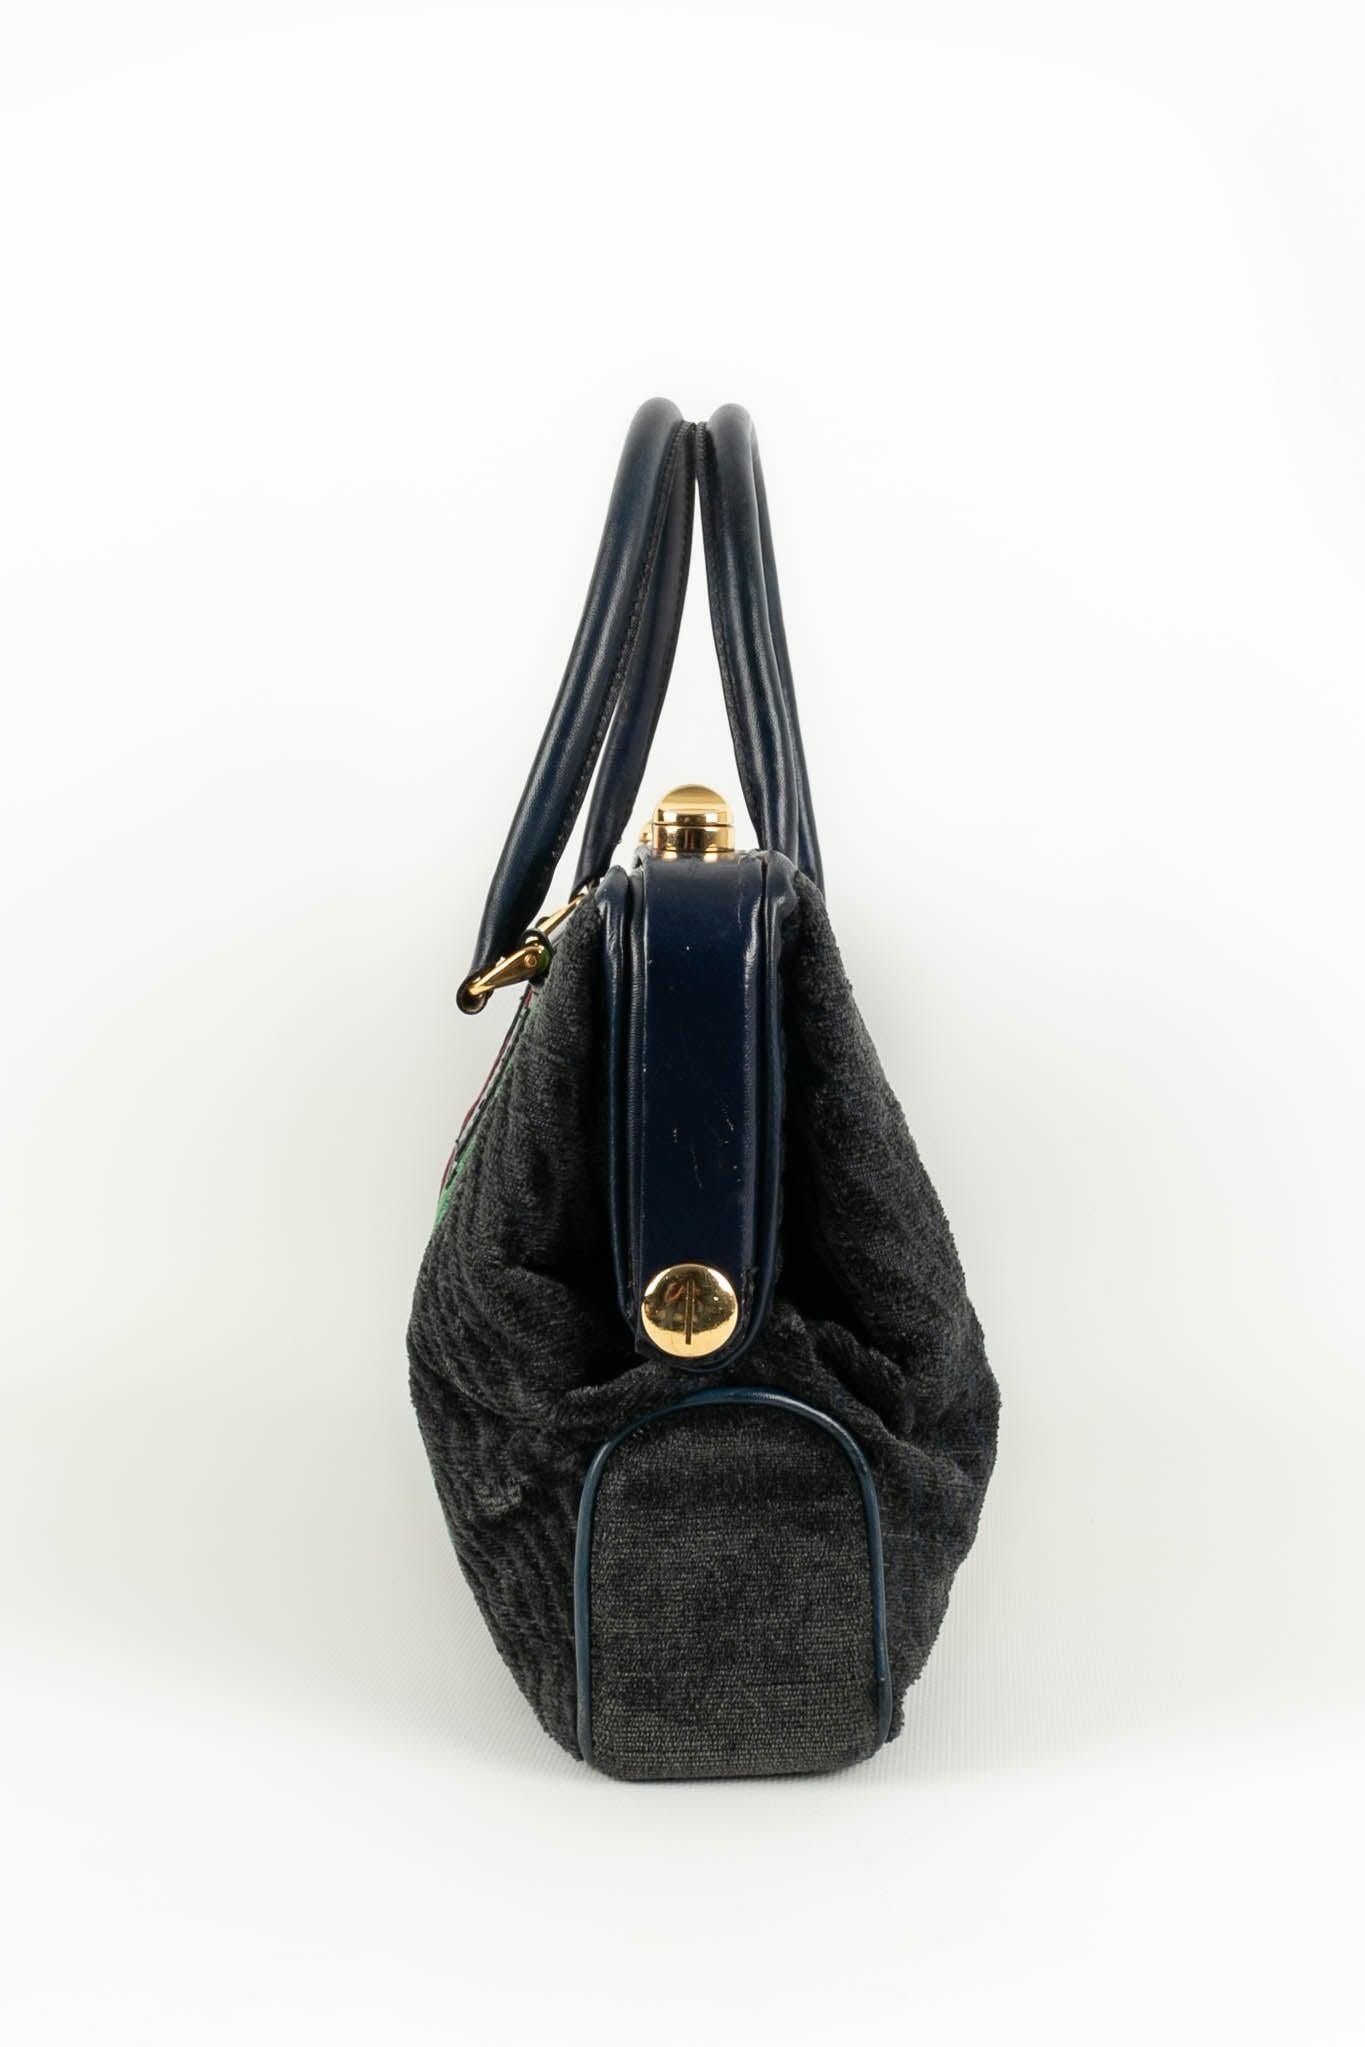 (Made in France) Velvet and dark blue leather bag. Canvas interior. To note, rare marks on the leather.

Additional information:
Condition: Good condition
Dimensions: Width : 39 cm - Height : 22 cm - Depth : 7 cm - Handles : 45 cm 

Seller